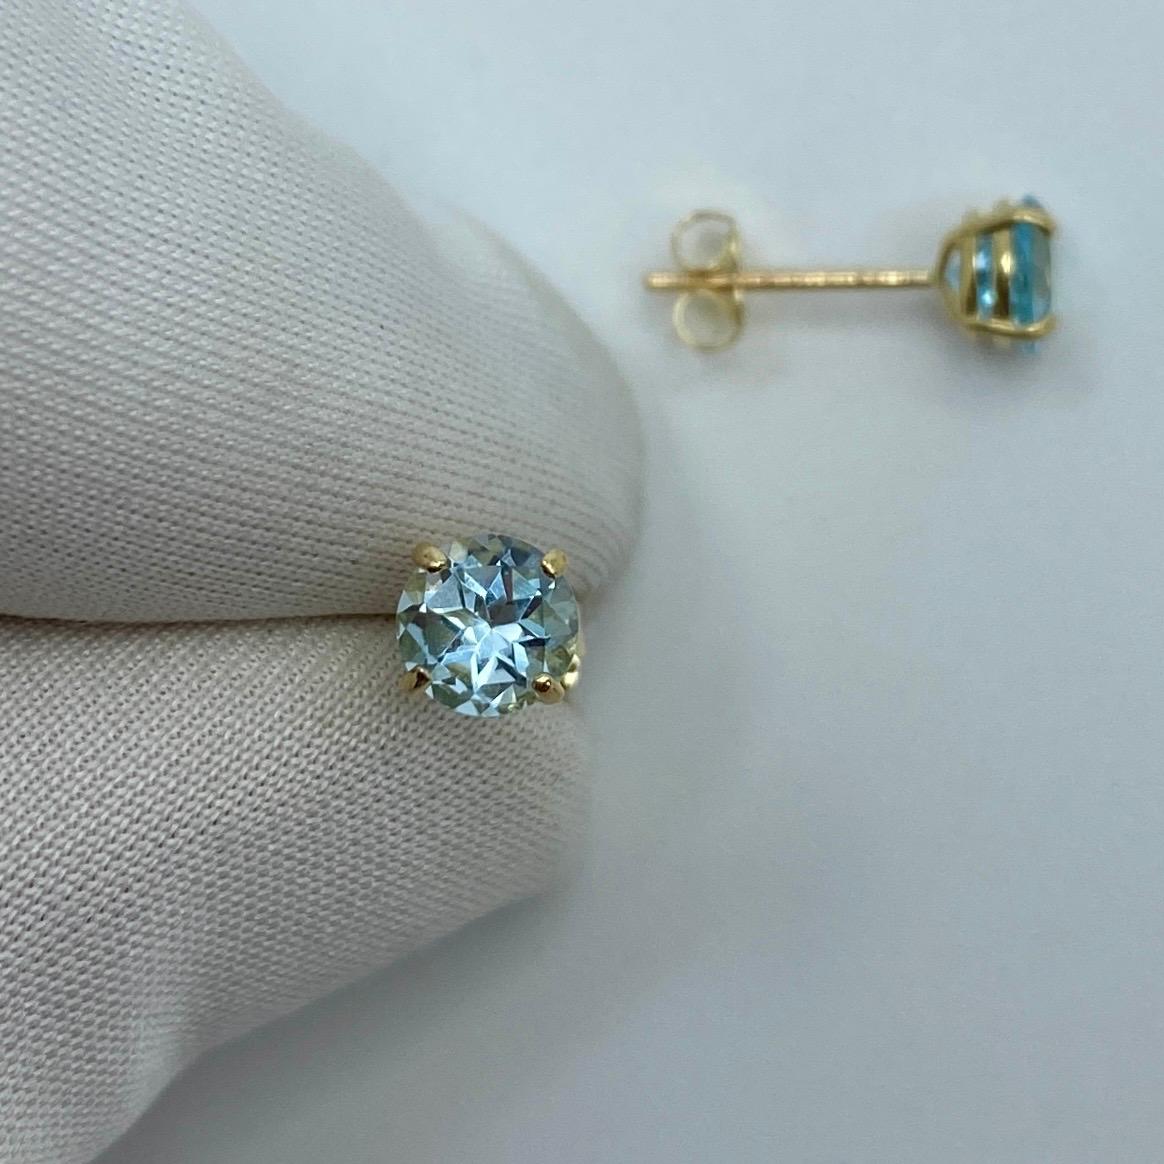 Natural Bright Blue 1.15 Carat Topaz Yellow Gold Earring Studs.

Beautiful 5mm matching pair of round topaz with bright blue colour, excellent clarity and an excellent round brilliant cut.

Set in lightweight 9k yellow gold suds with butterfly